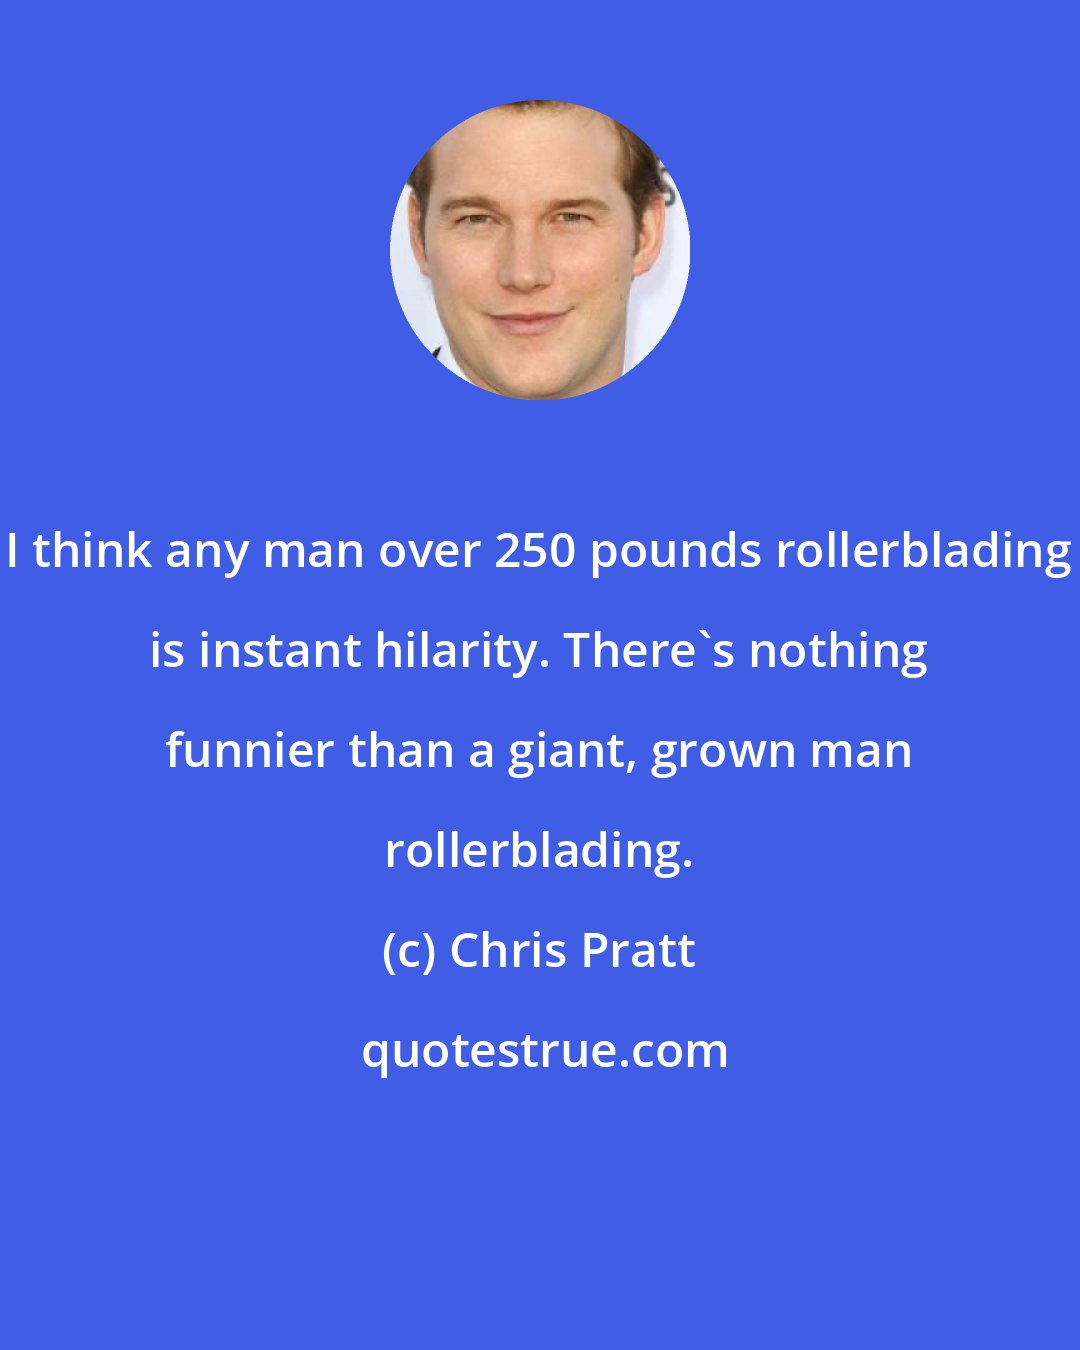 Chris Pratt: I think any man over 250 pounds rollerblading is instant hilarity. There's nothing funnier than a giant, grown man rollerblading.